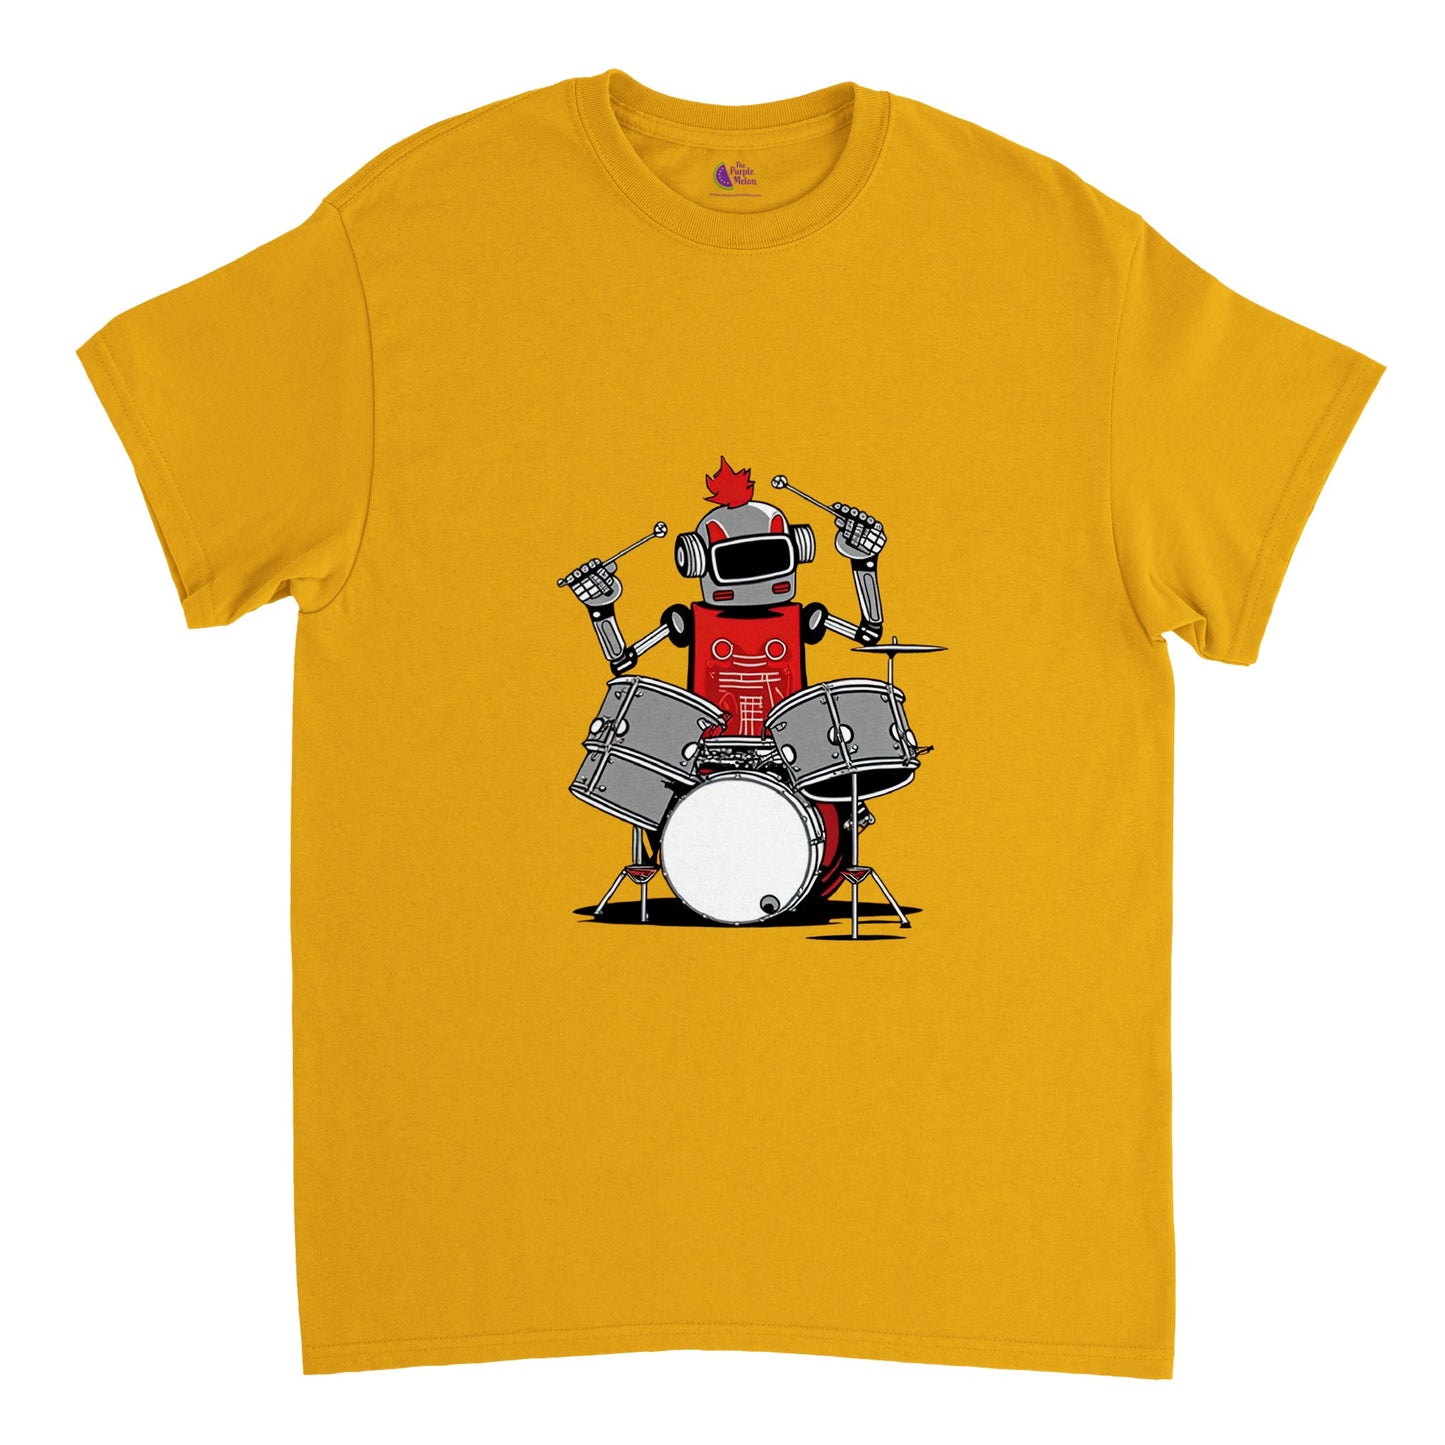 Gold t-shirt with a robot playing the drums graphic